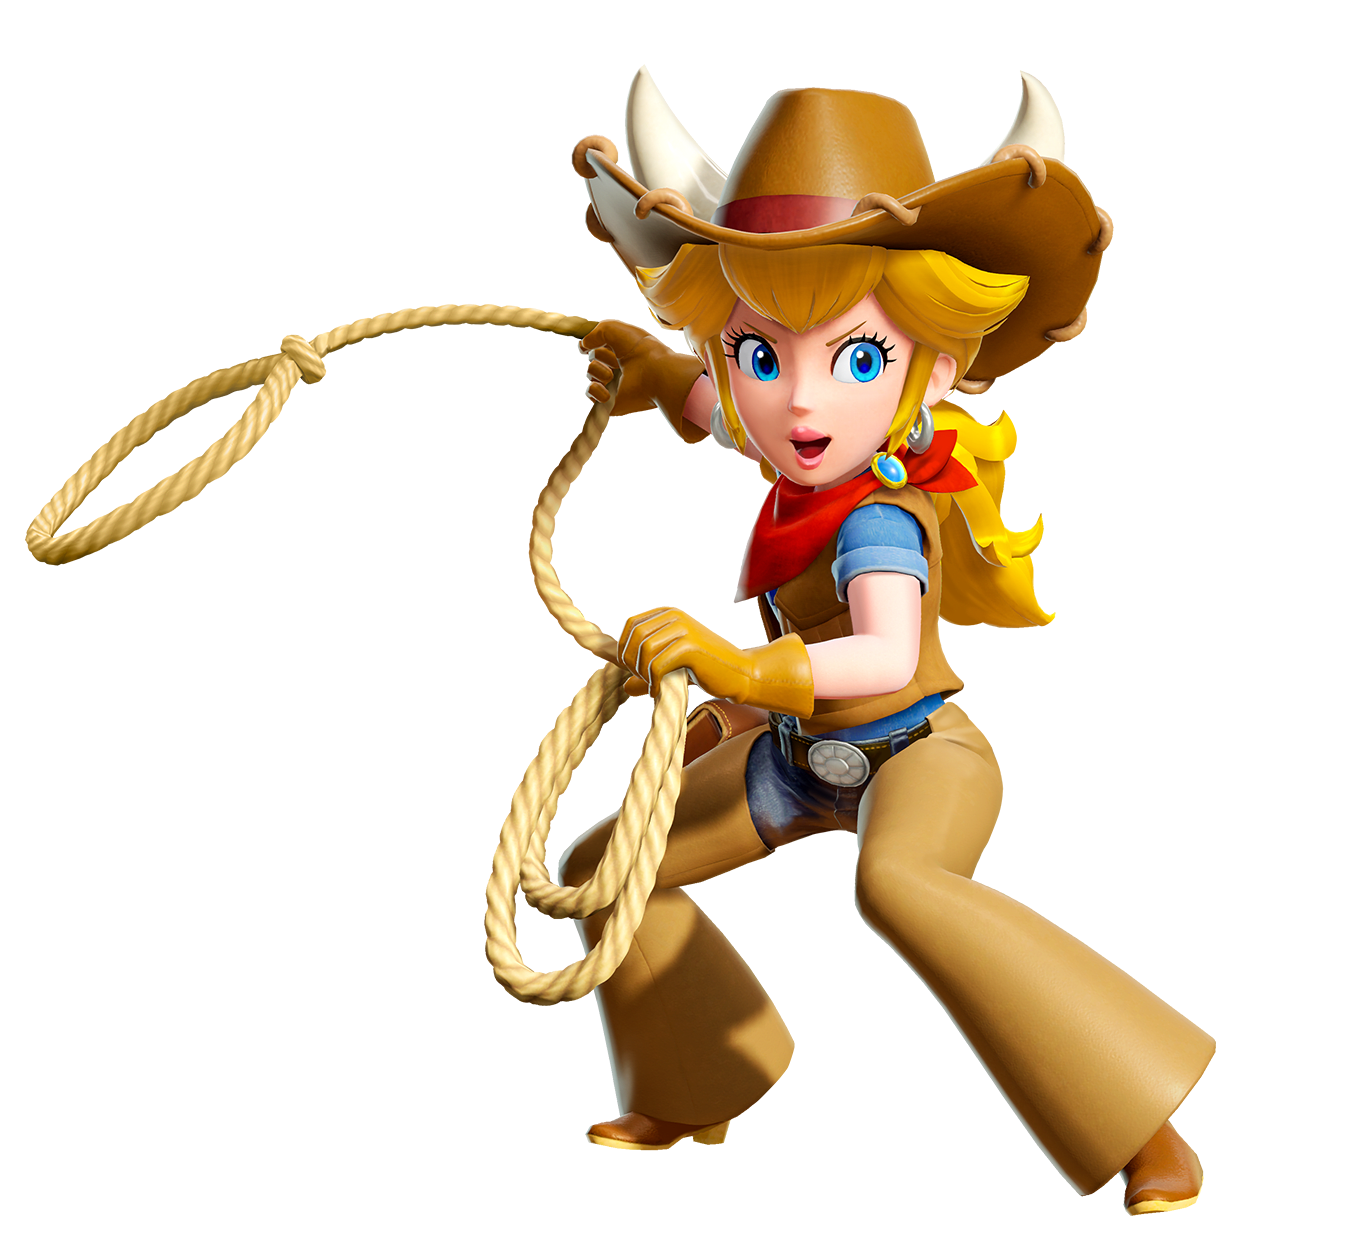 Peach stands at the ready, twirling a lasso. She wears riding chaps, a red neckerchief, and a cowgirl hat decorated with bull horns.